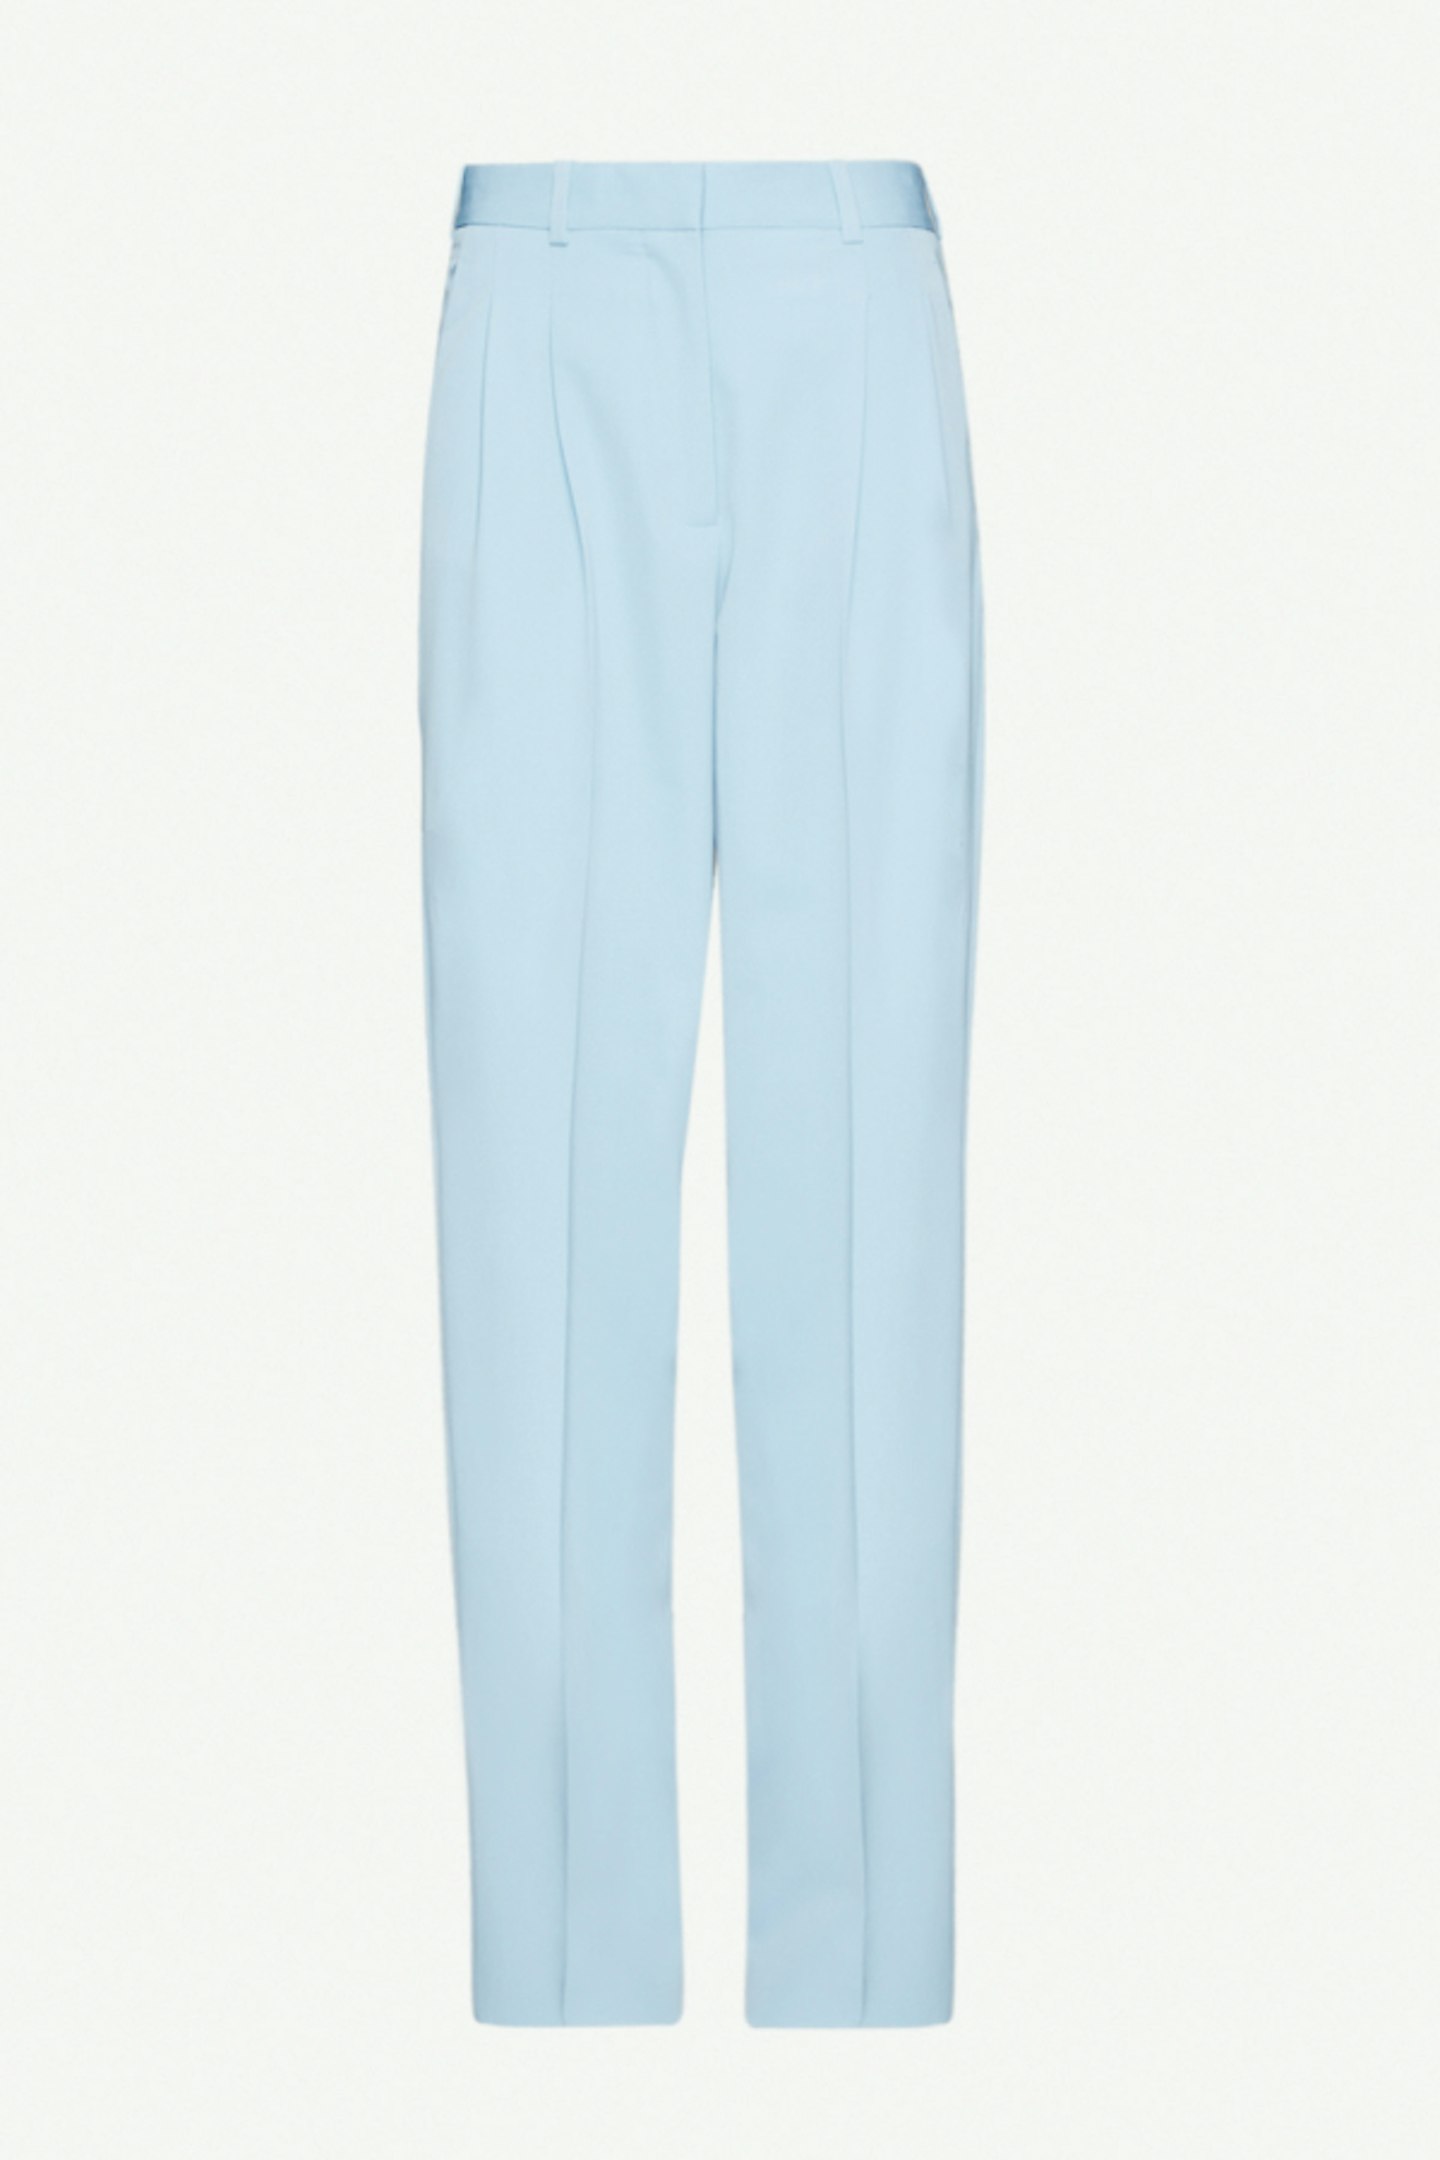 Stella McCartney, Tapered Wool Trousers, Rent From £36